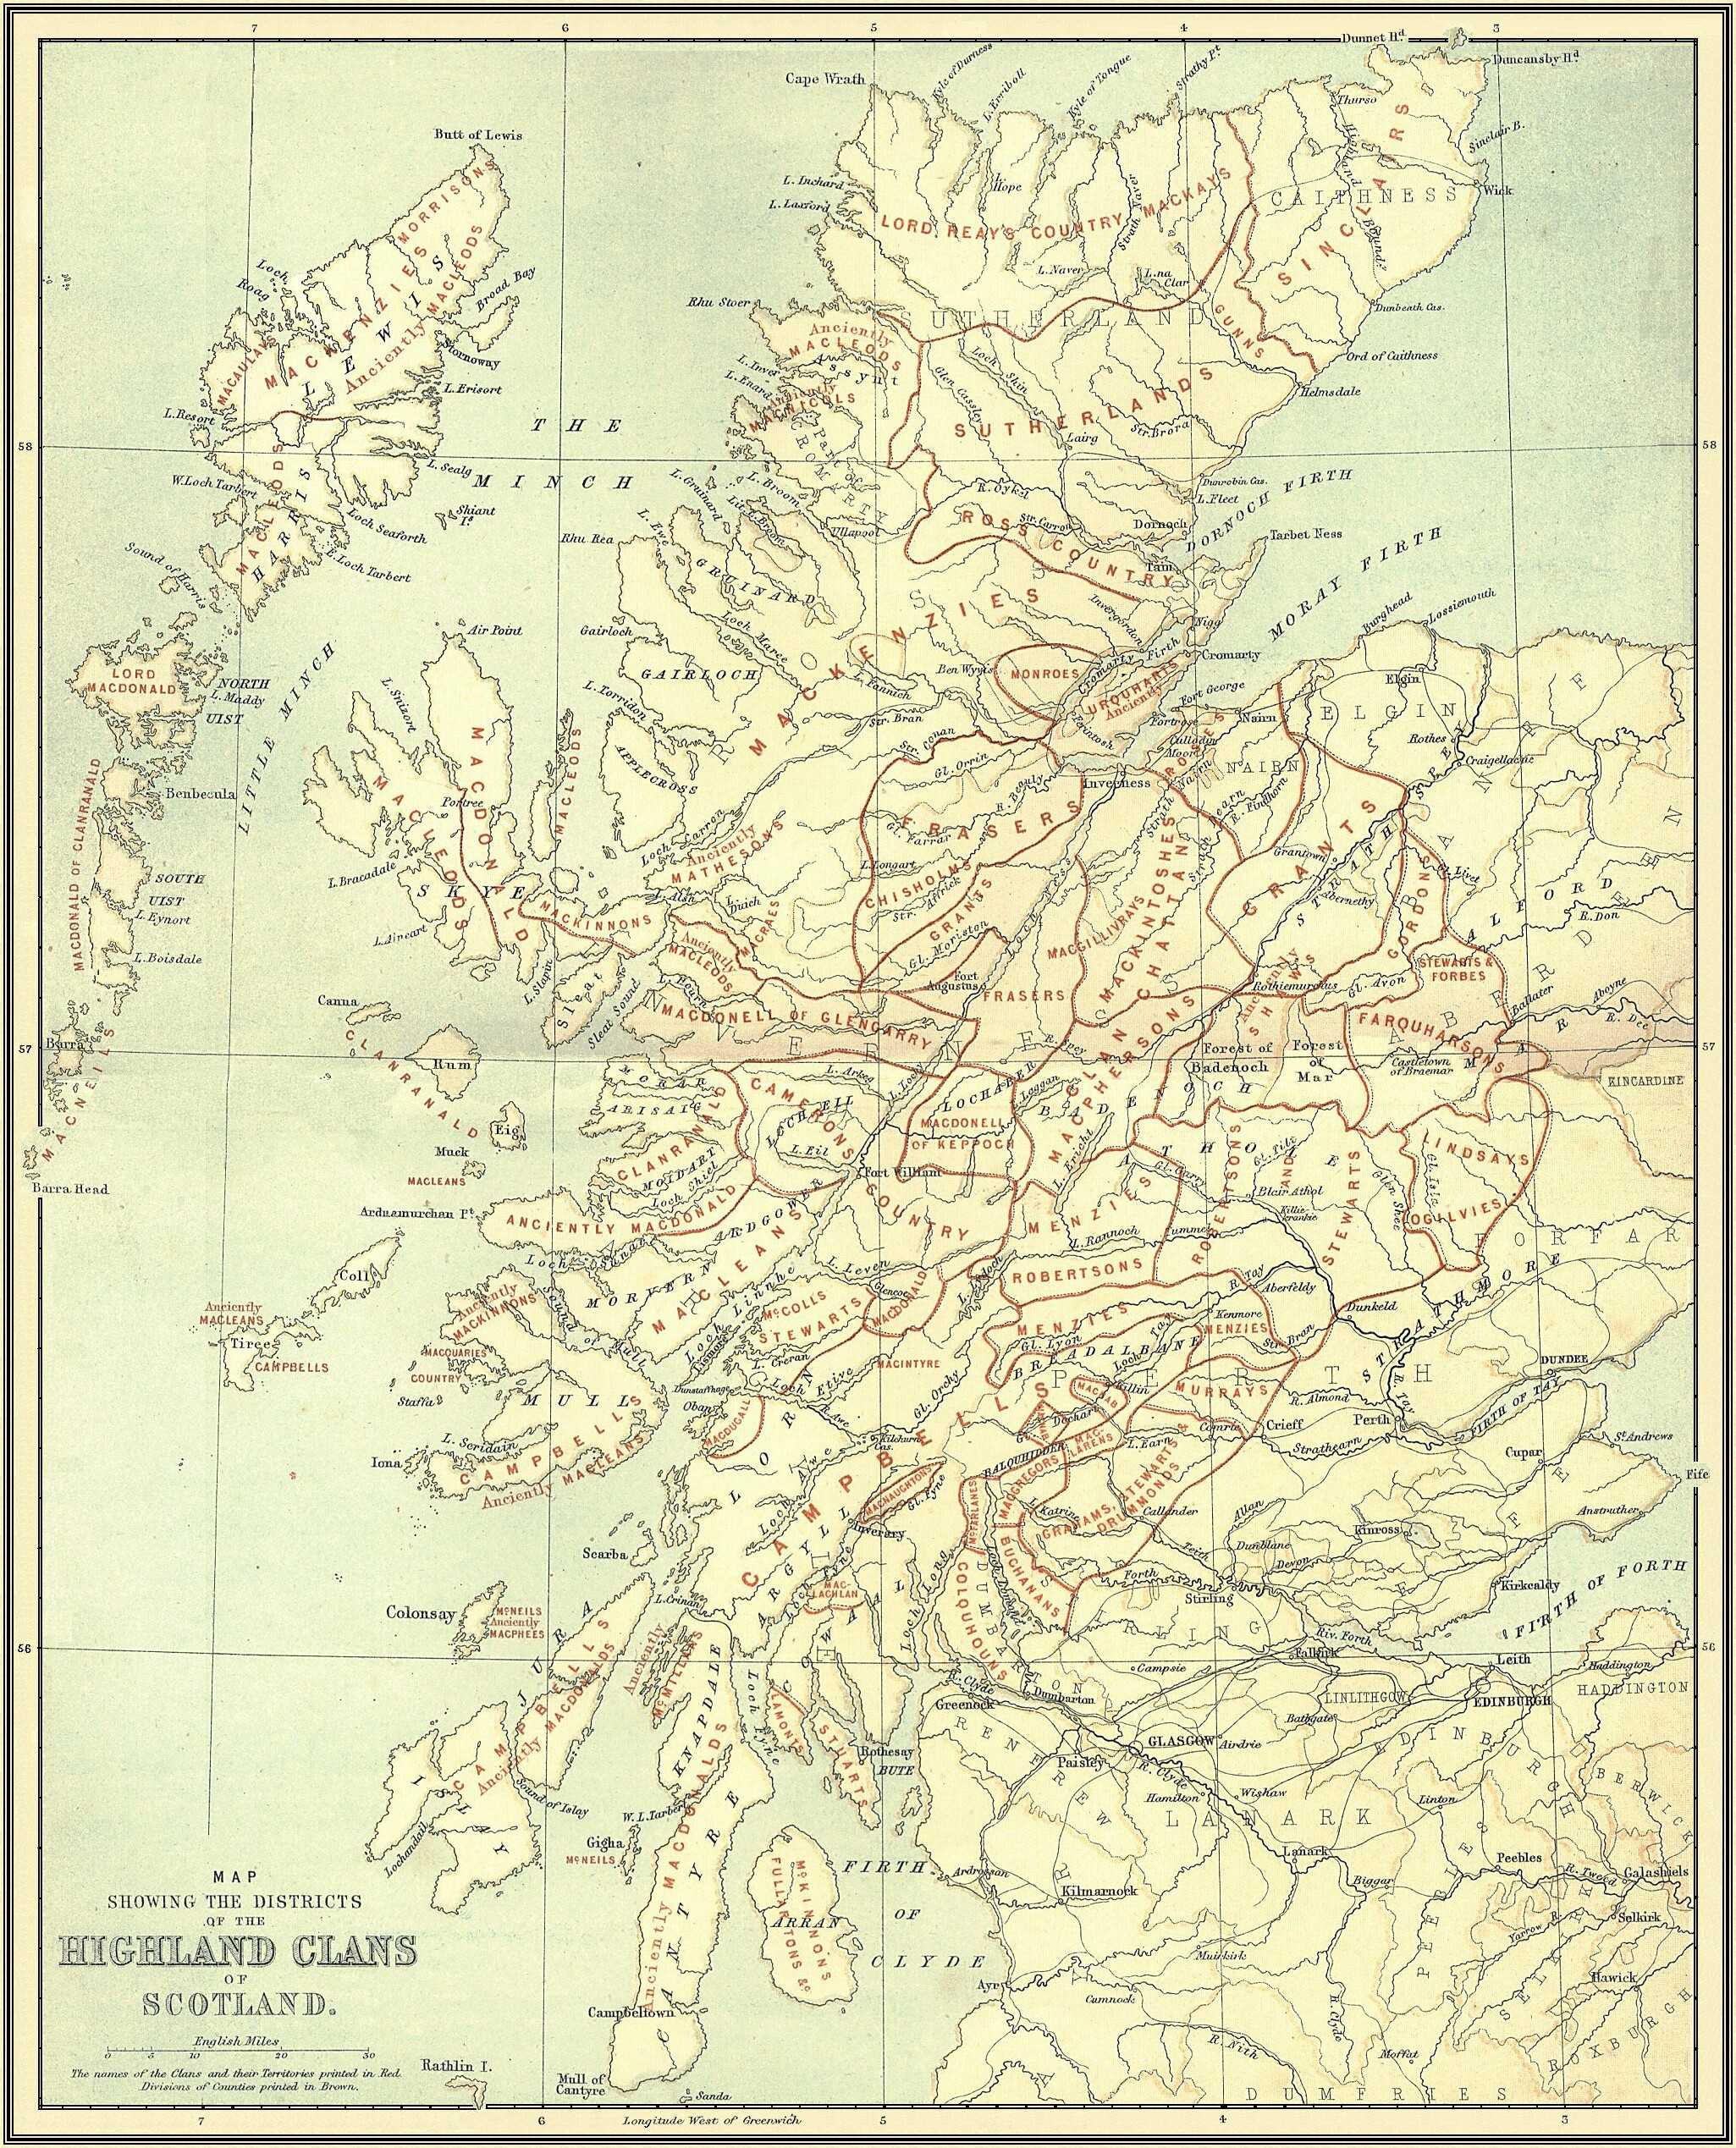 Map Showing The Districts Of The Highland Clans Of Scotland